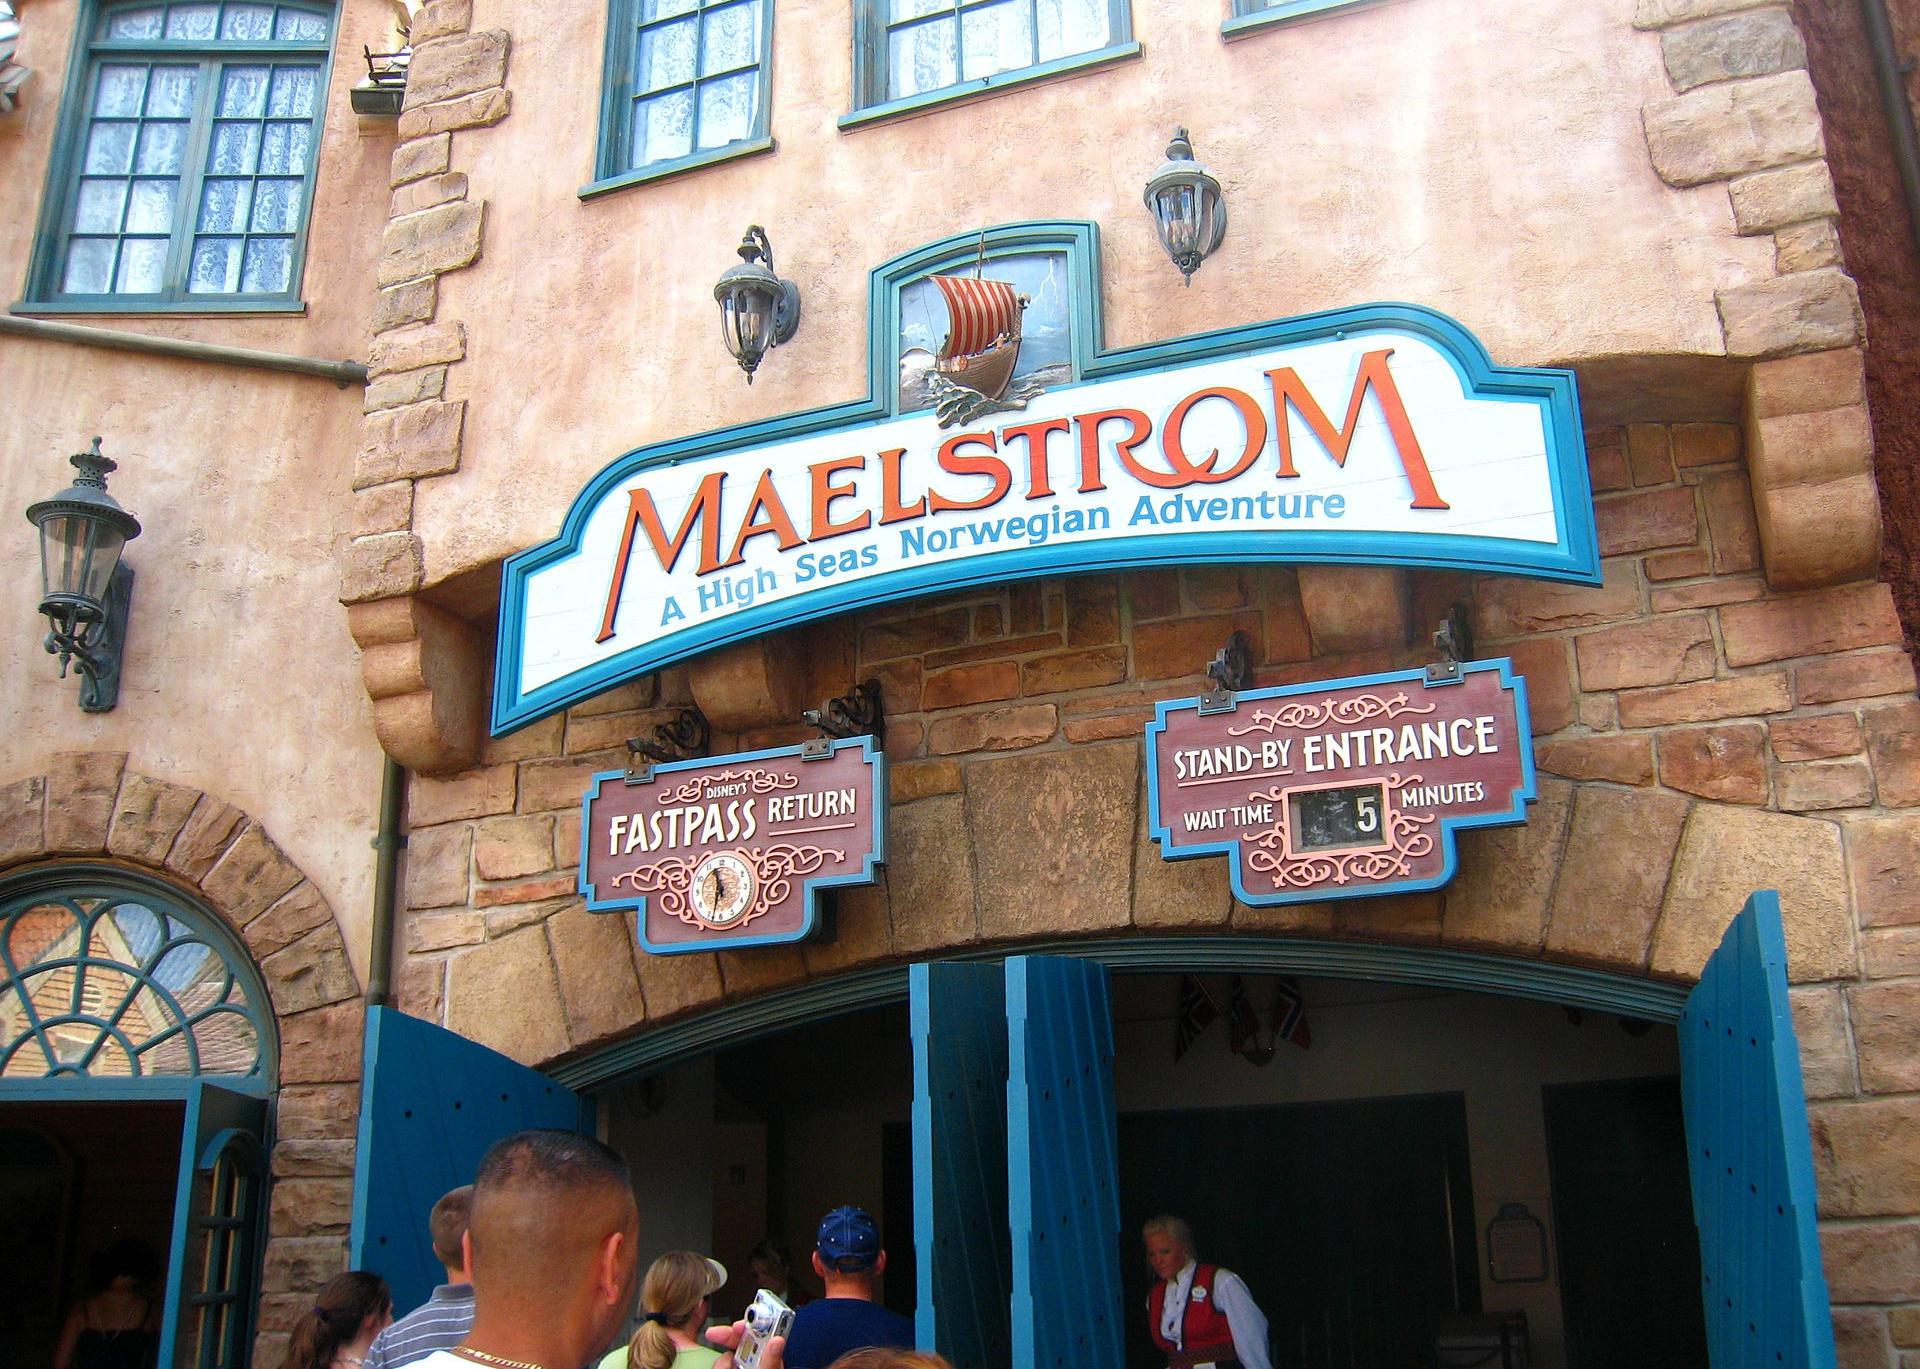 Norway's pavilion at Epcot with Maelstrom sign